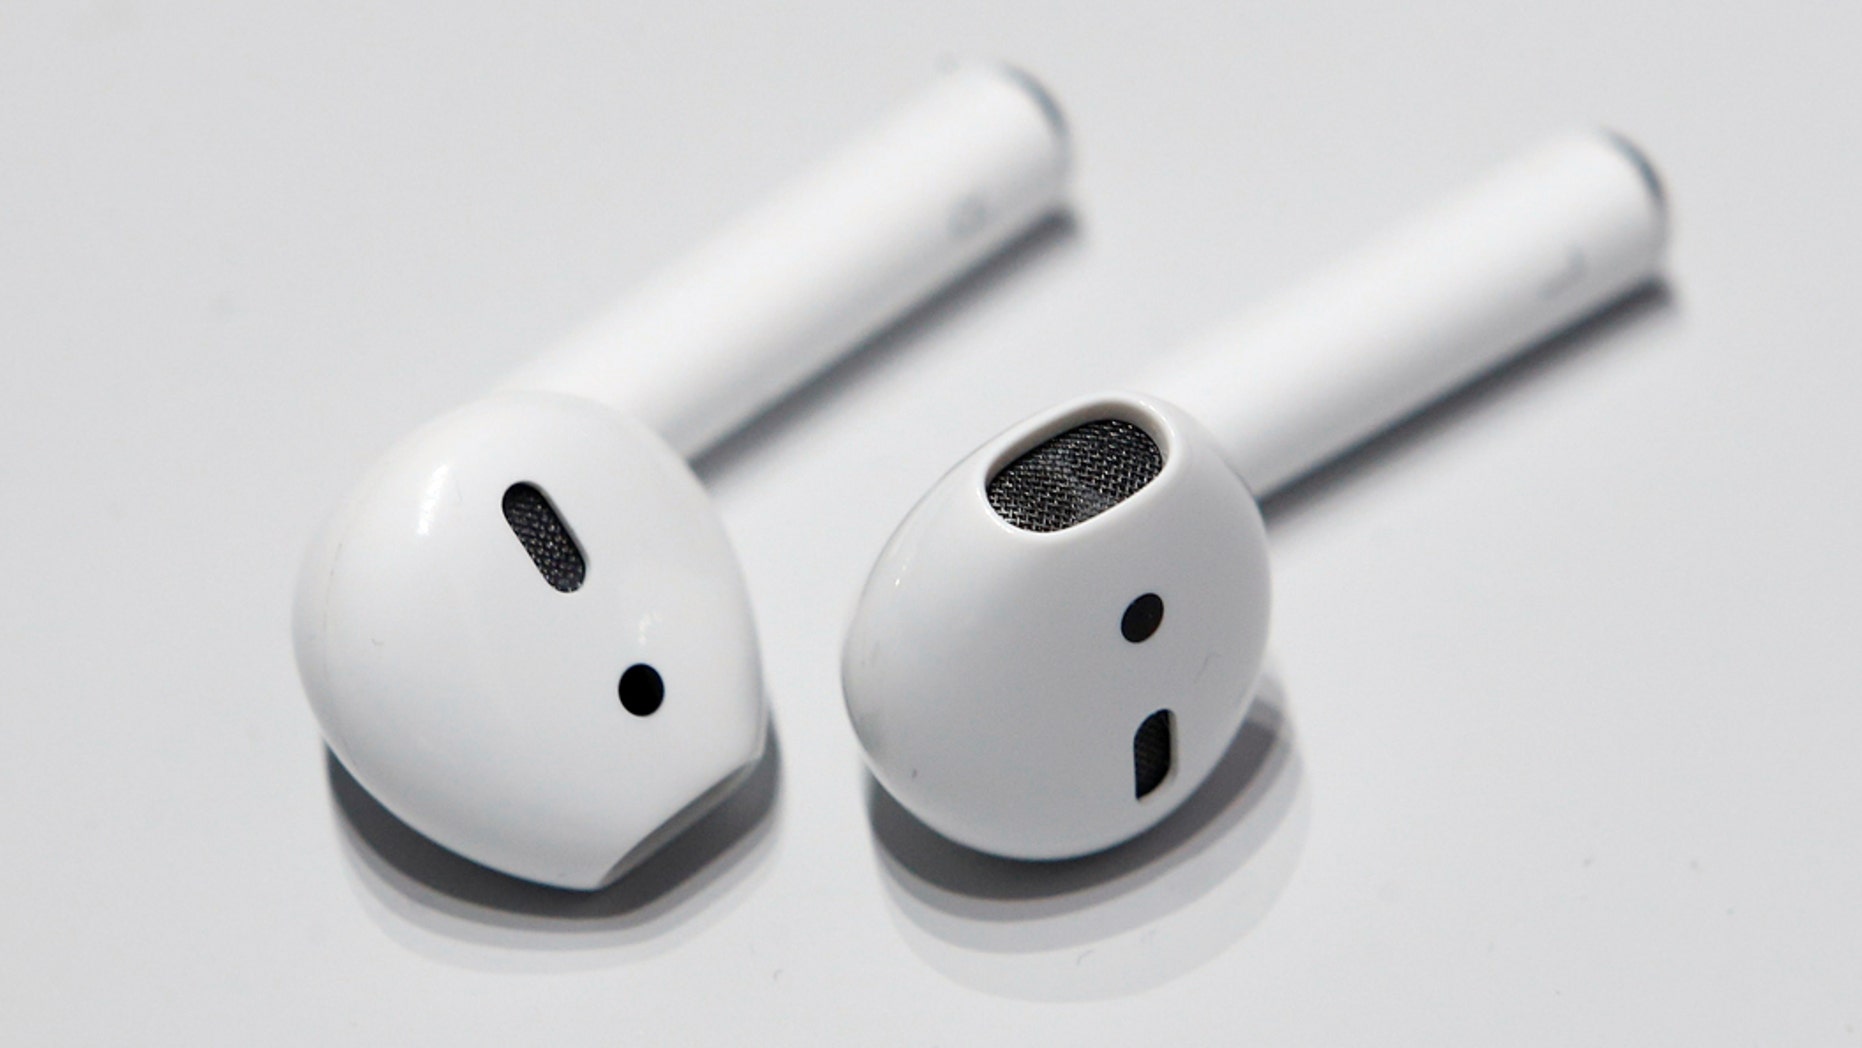 File photo: Apple AirPods are displayed during a media event in San Francisco, California, U.S. September 7, 2016. (REUTERS/Beck Diefenbach)